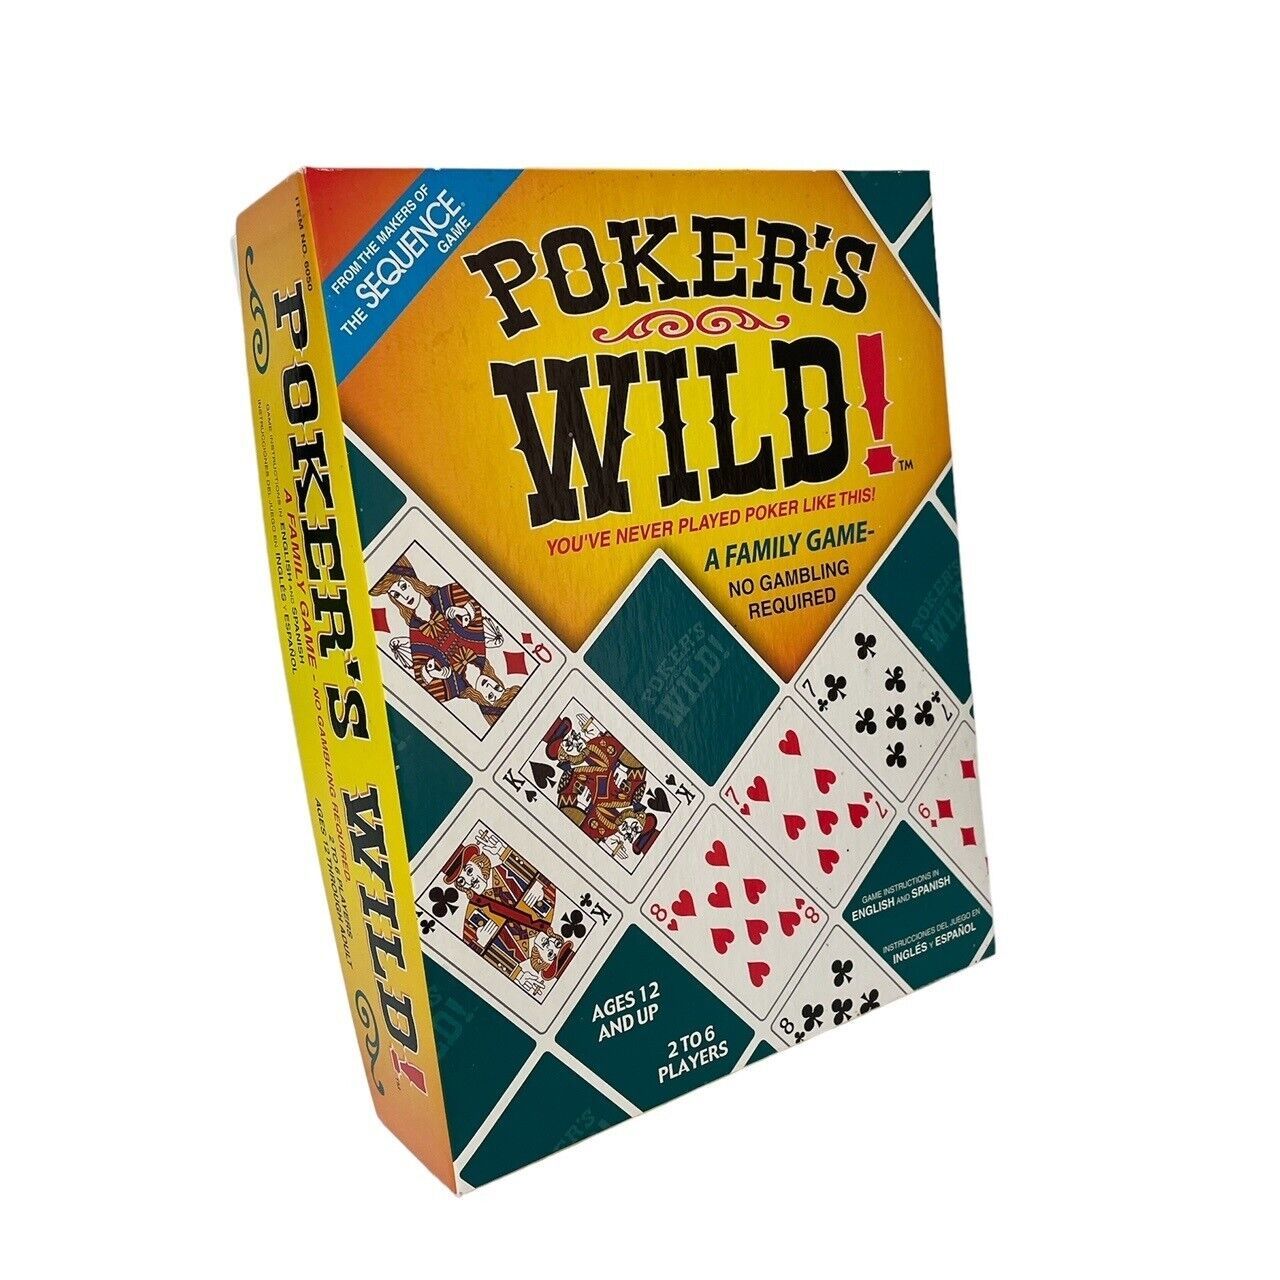 Pokers Wild Family Poker Board Game By Jax Vintage 2005 No Gambling Required - $18.21